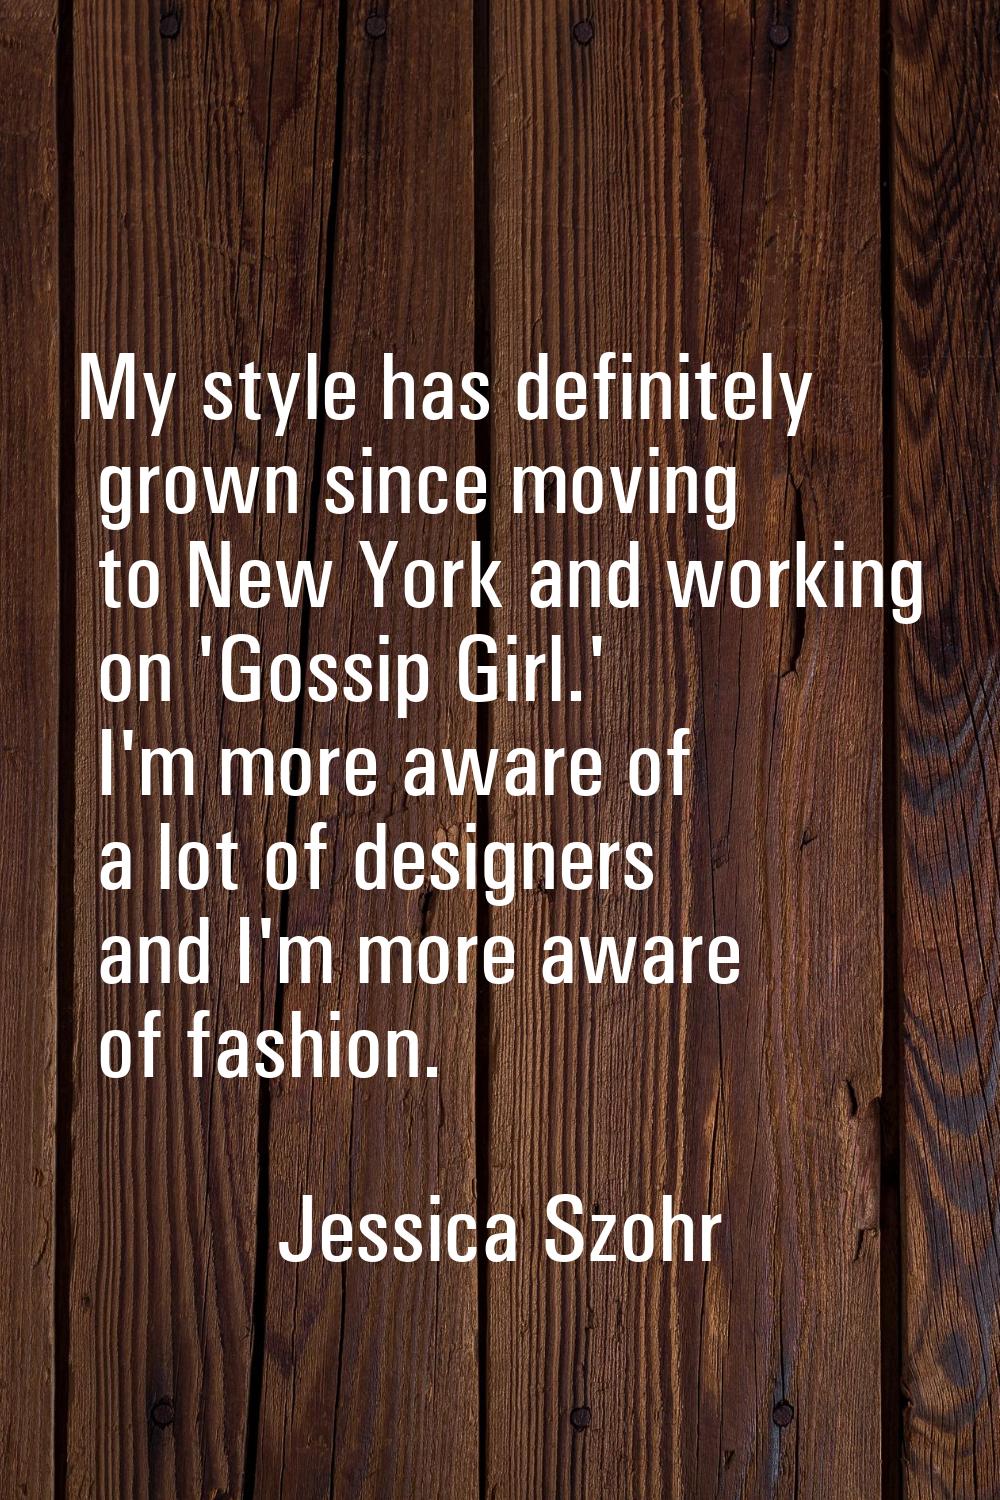 My style has definitely grown since moving to New York and working on 'Gossip Girl.' I'm more aware